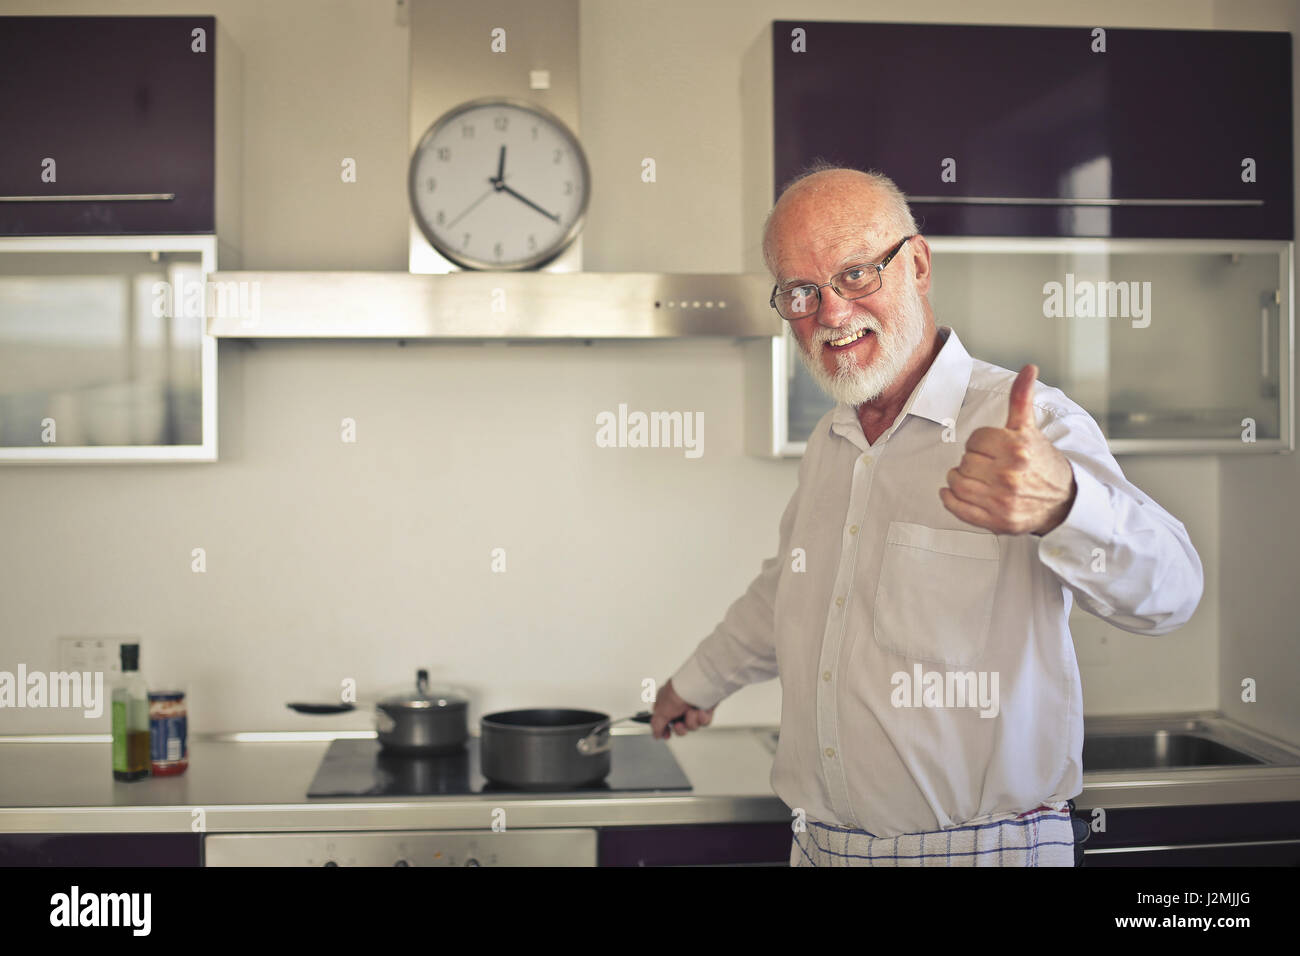 Old man cooking and showing like sign Stock Photo